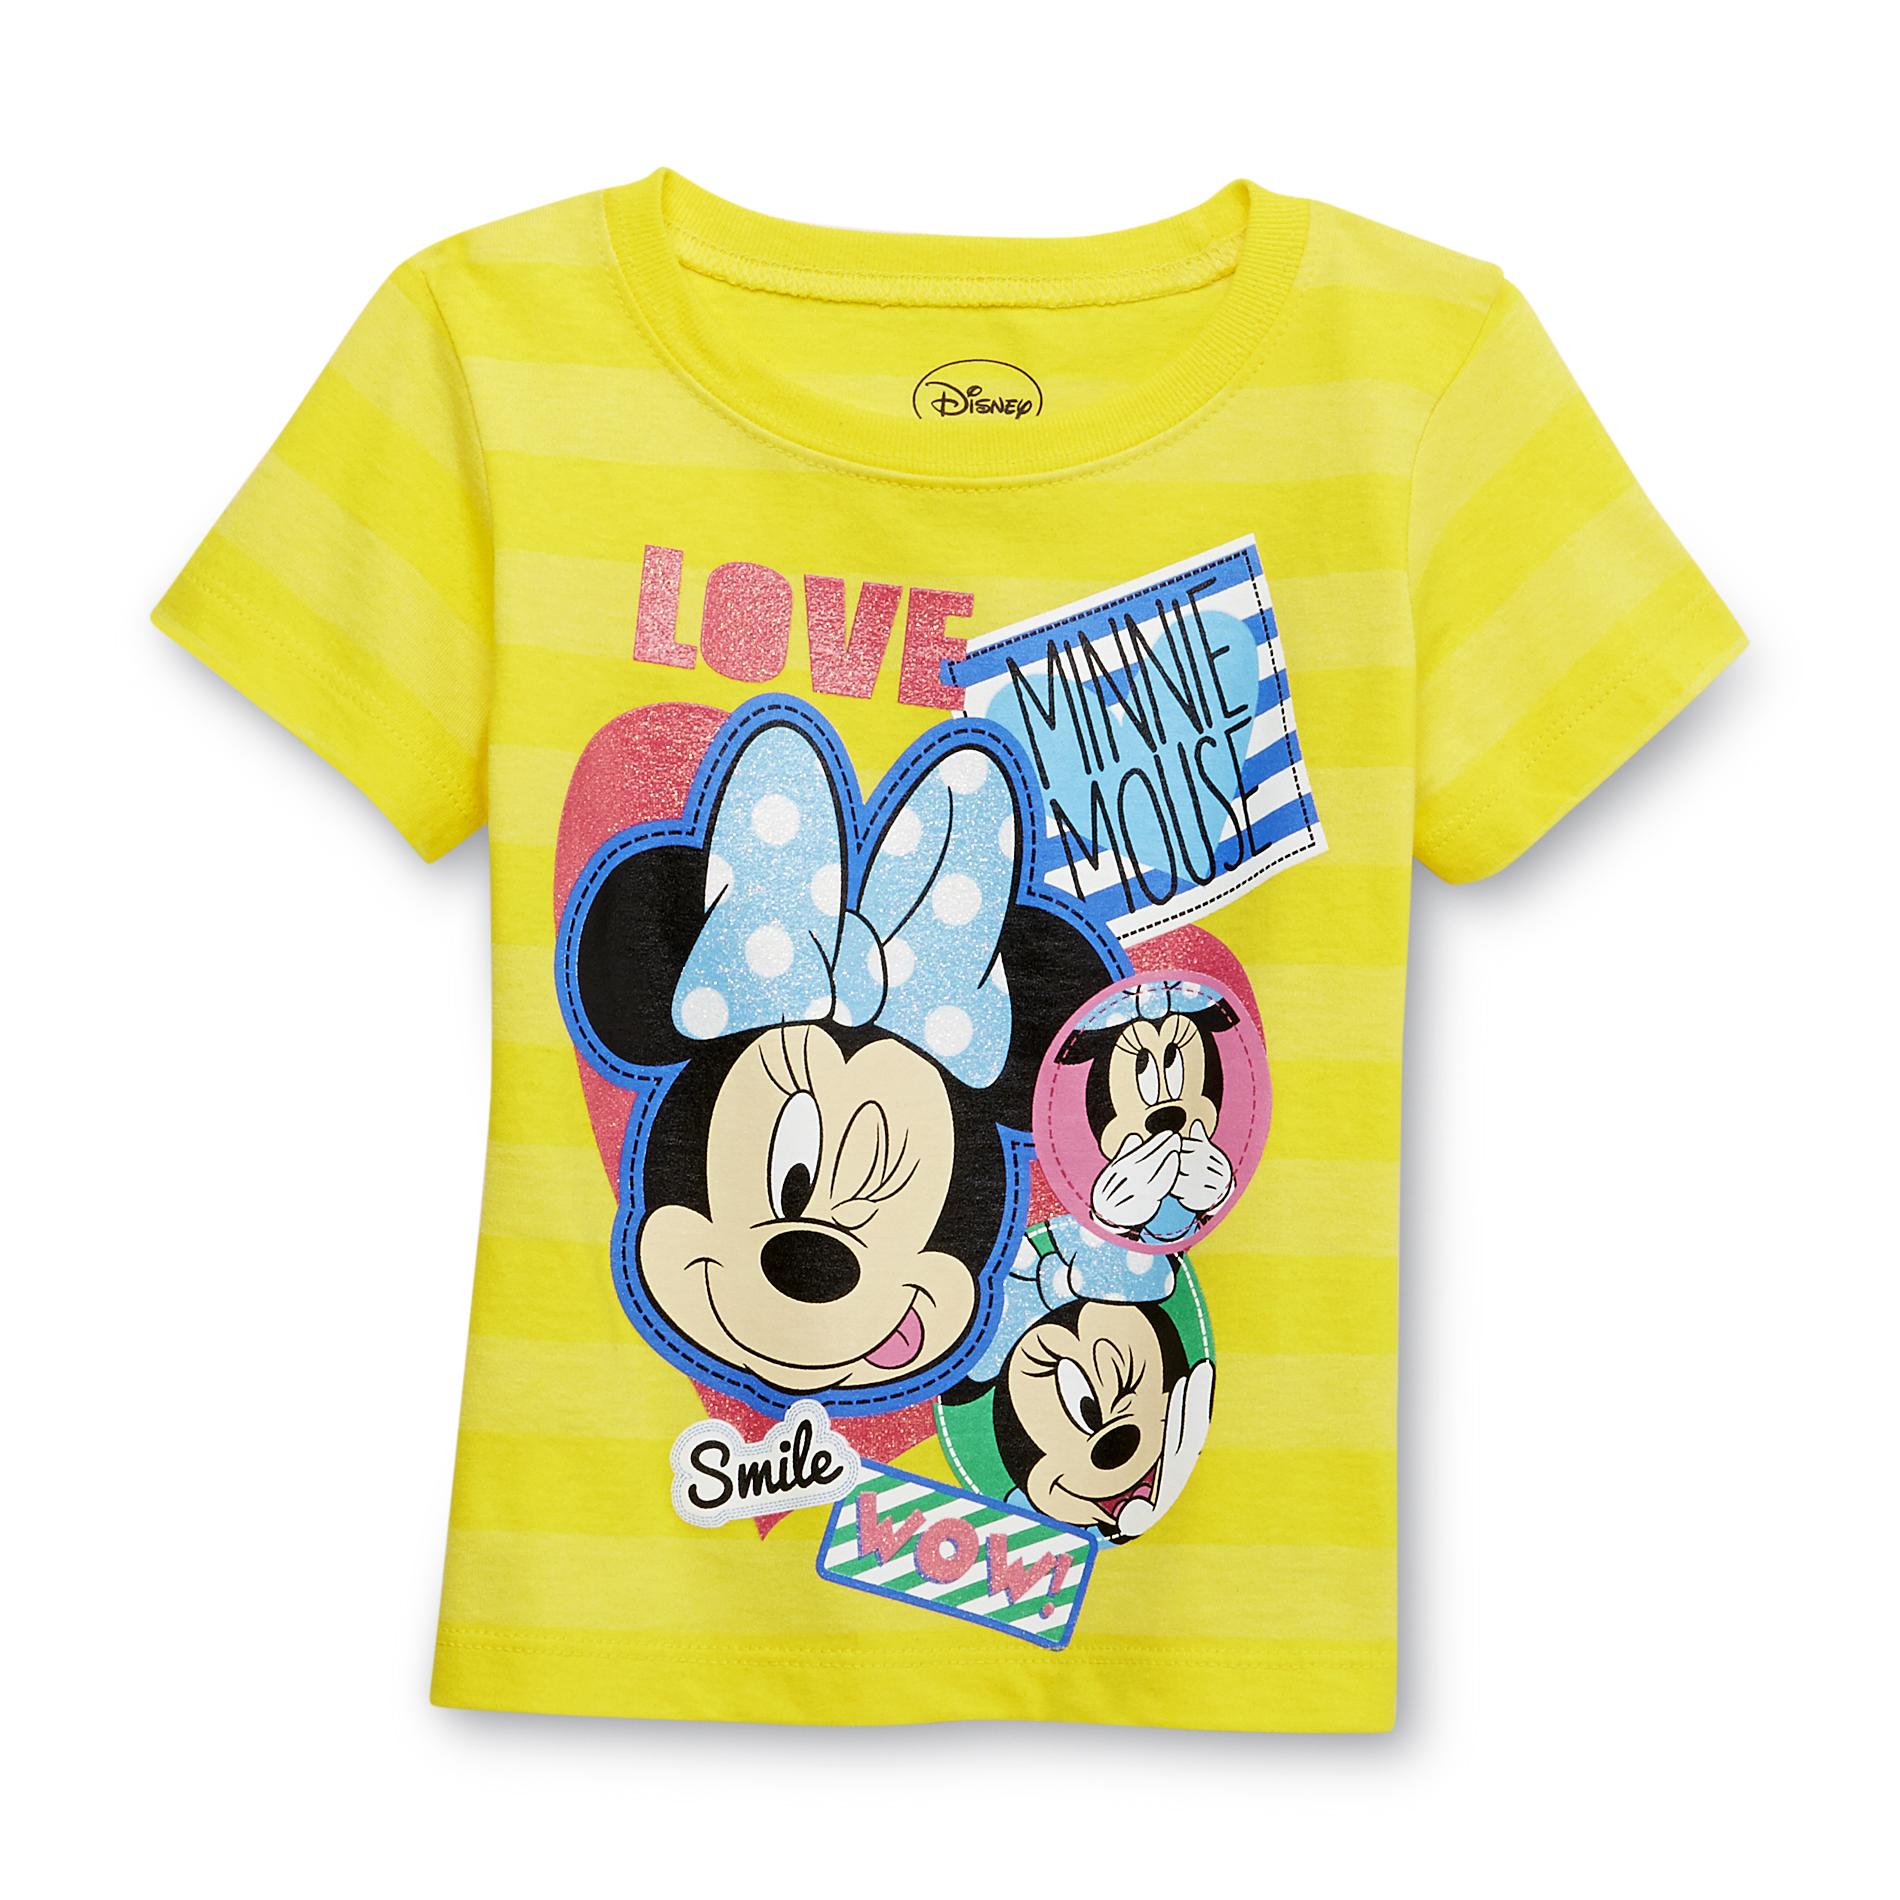 Disney Toddler Girl's Graphic T-Shirt - Minnie Mouse